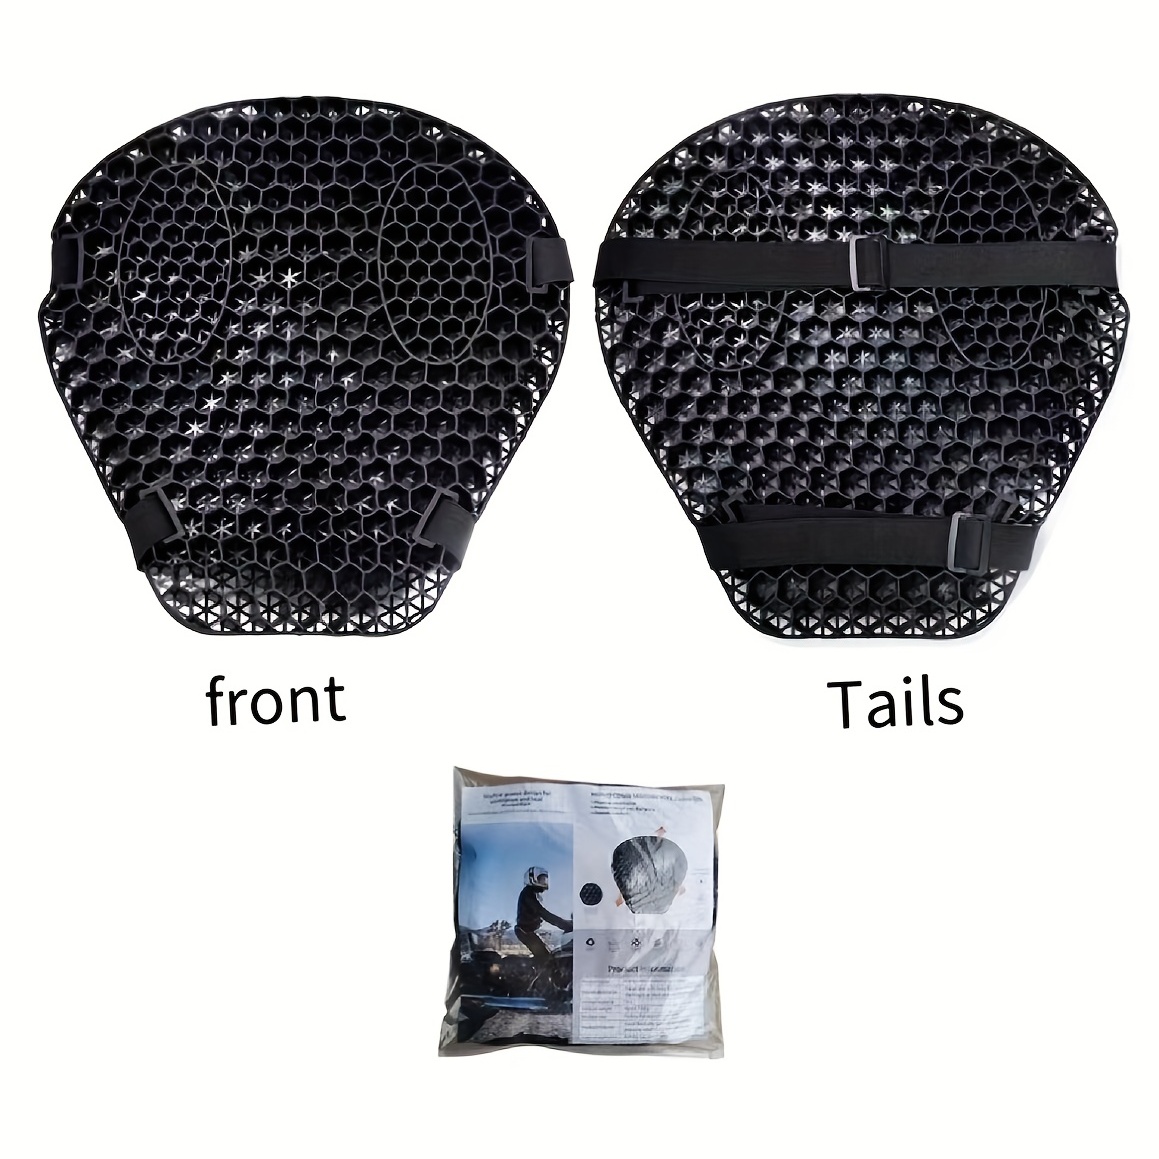 Universal Motorcycle Seat Cushion Newest Jelly Gel Material 3D Honeycomb  Shock Absorbing Seat Pad with Motorcycle Seat Cover